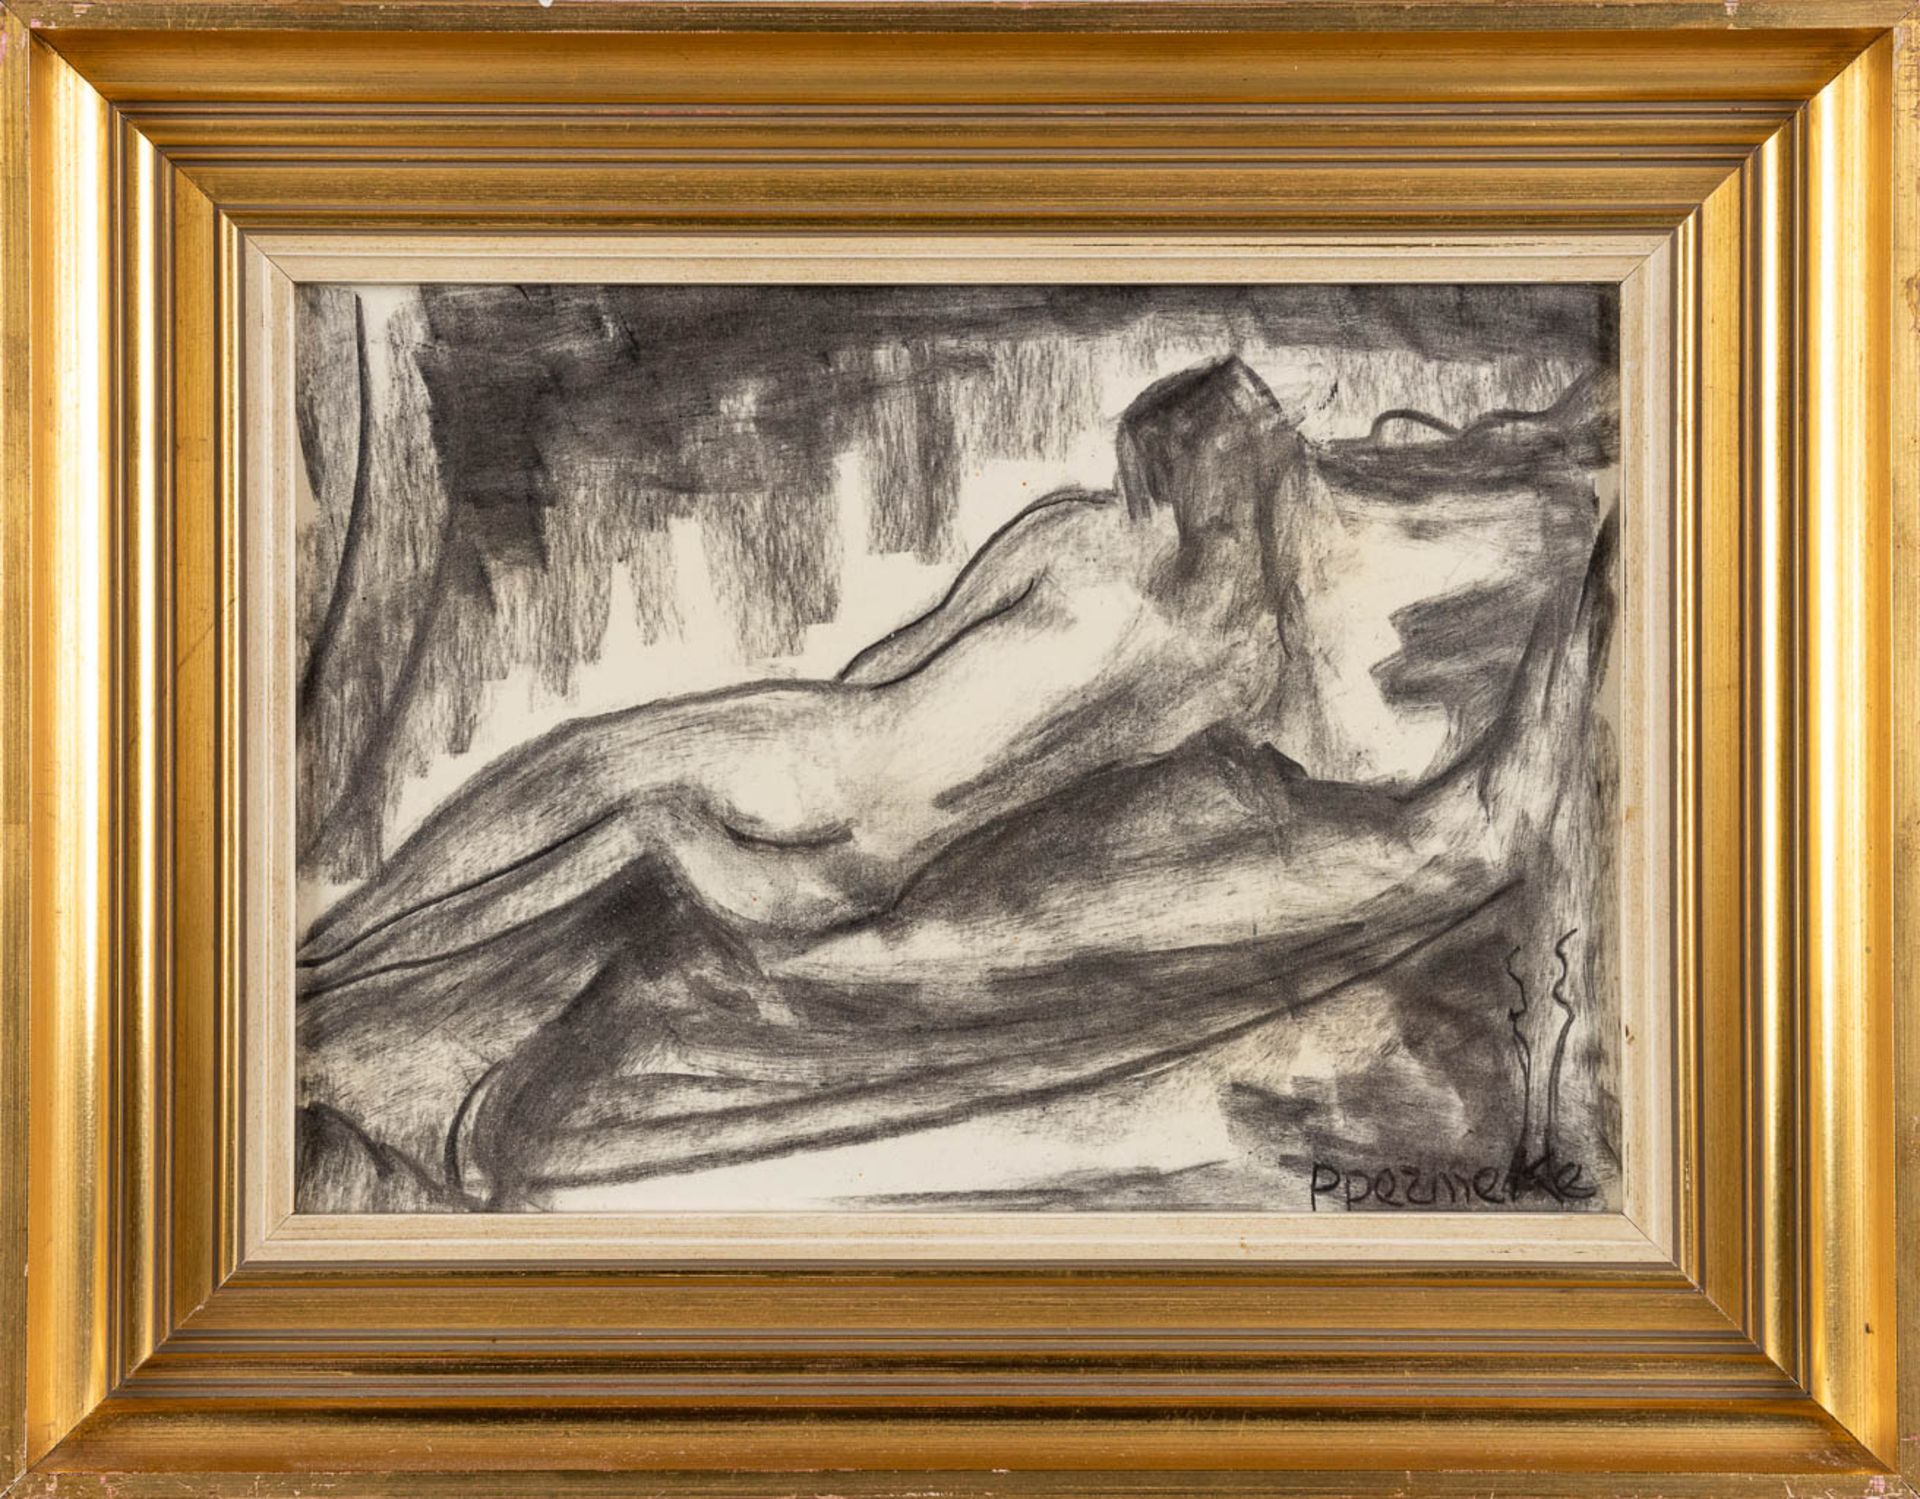 Paul PERMEKE (1918-1990) 'Reclined Nude' charcoal on paper. (W:34 x H:24 cm) - Image 3 of 5